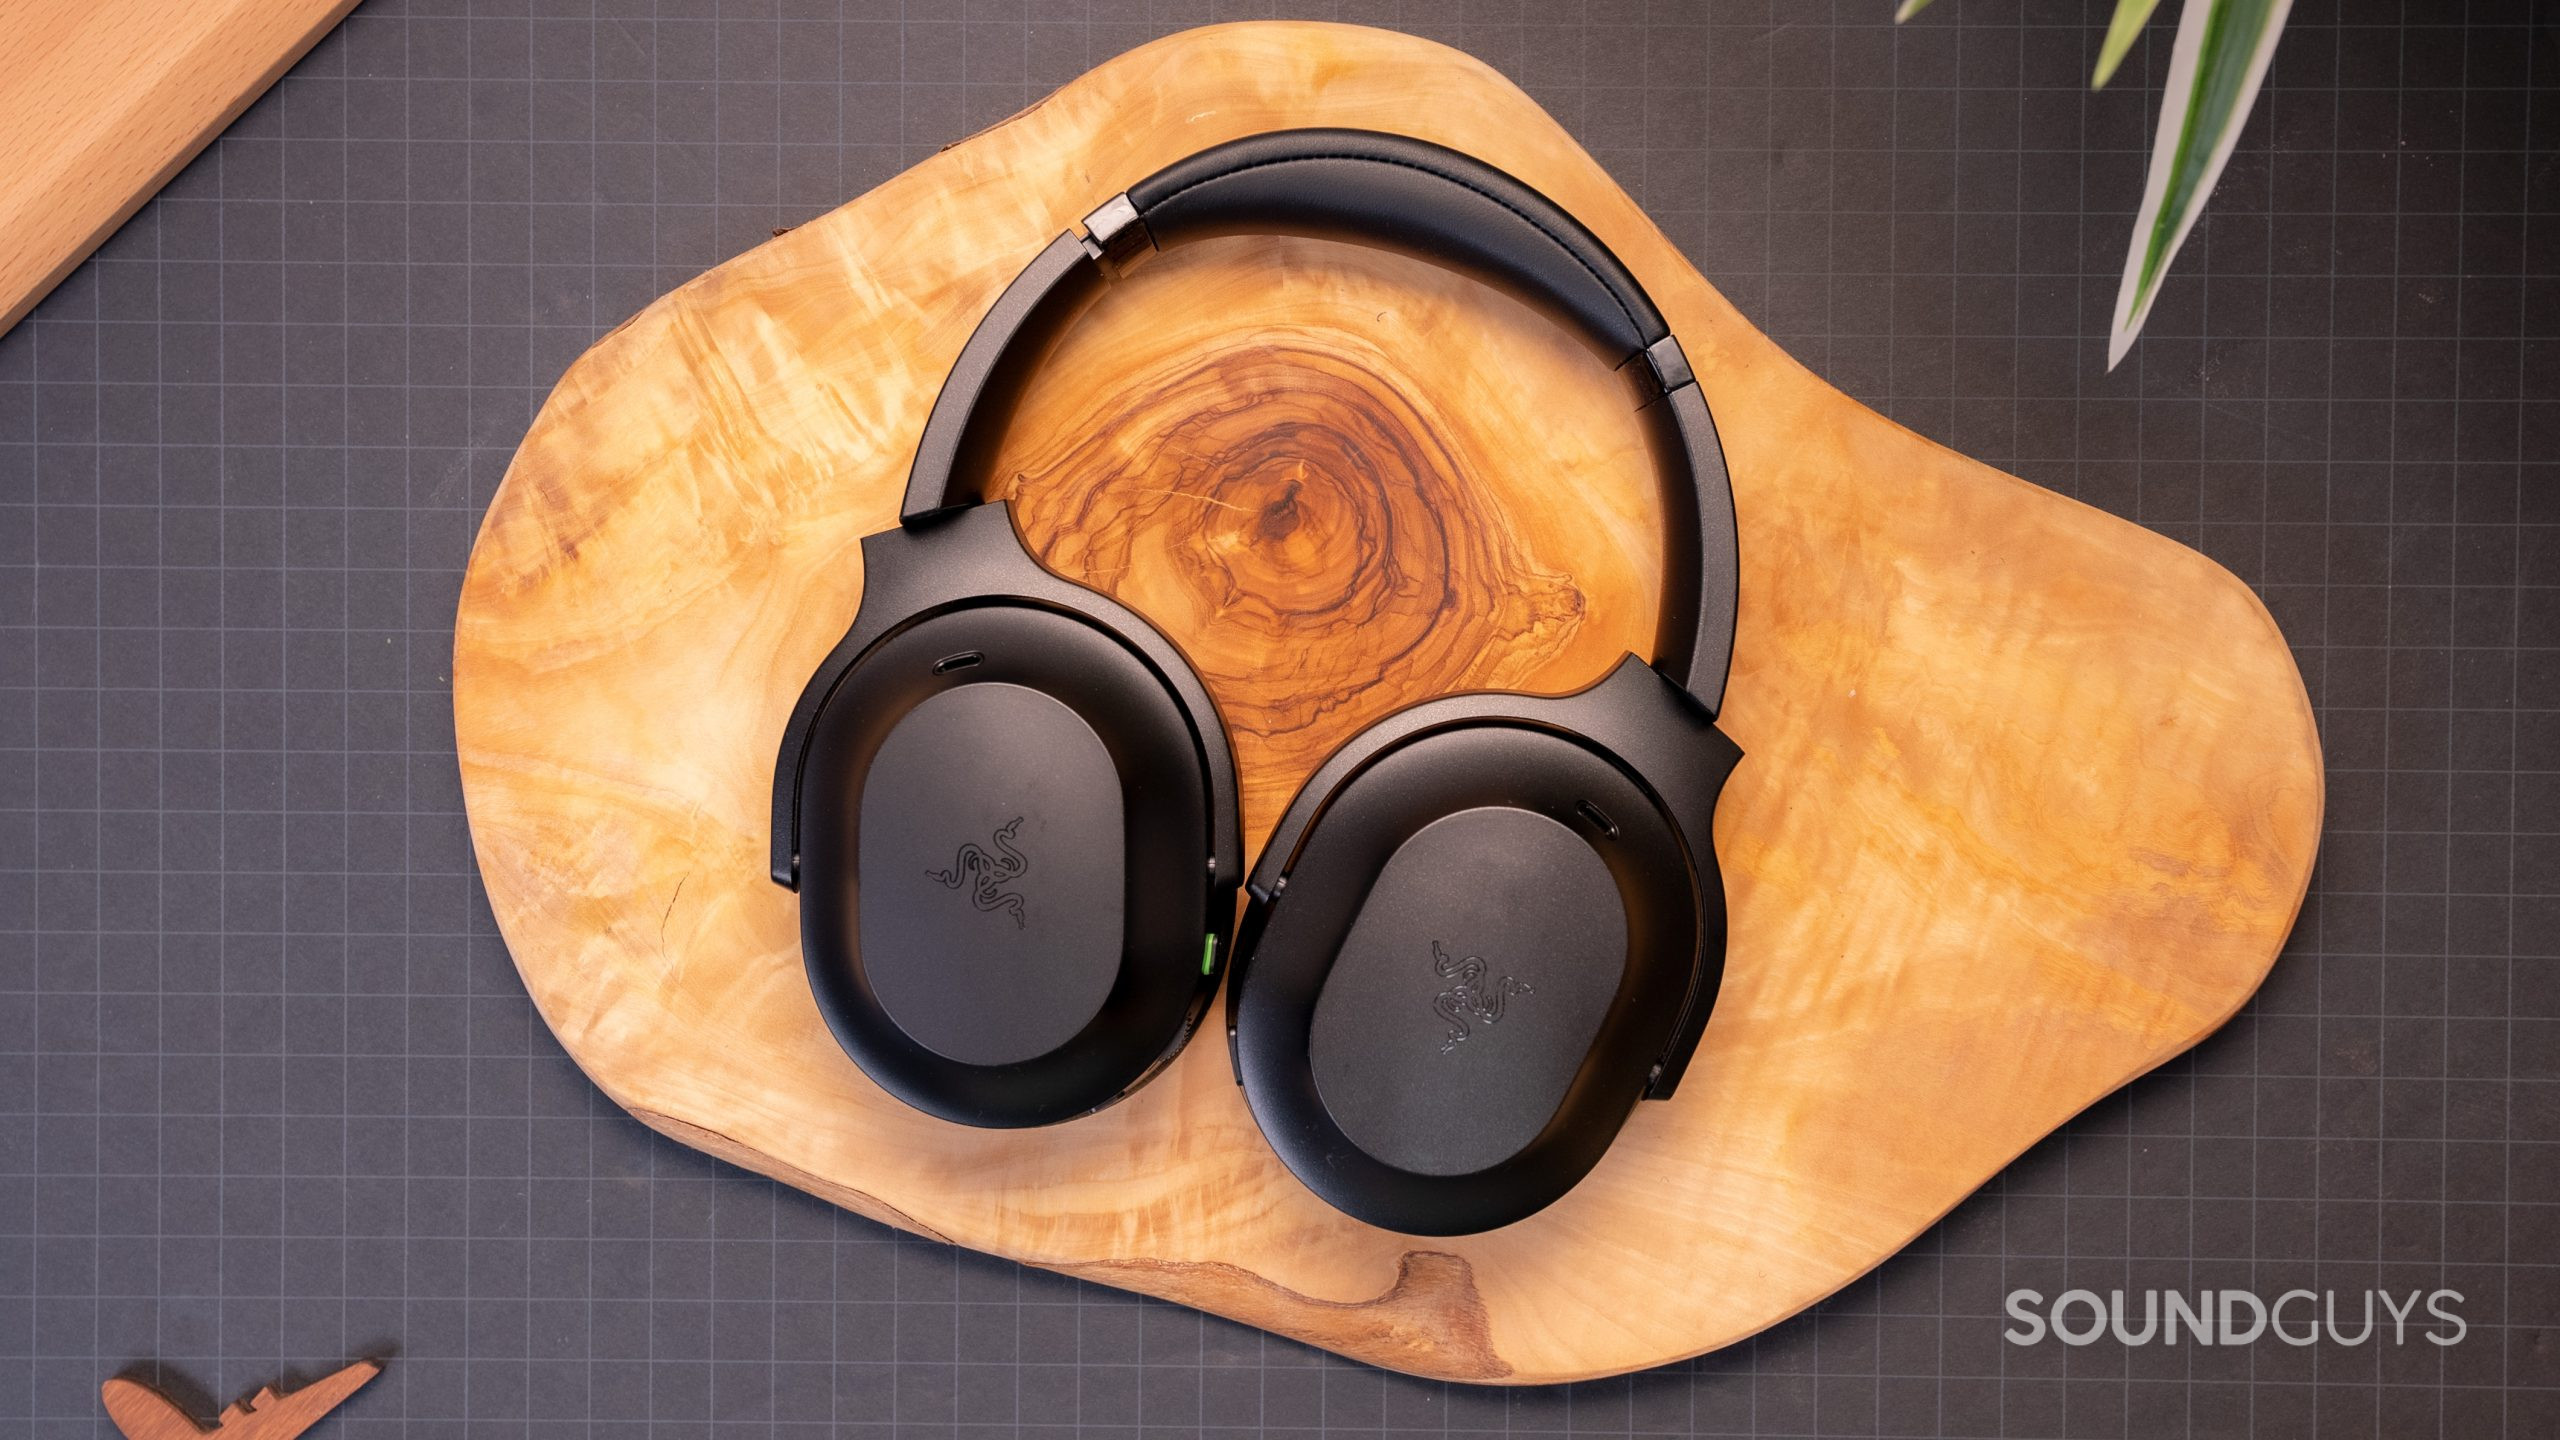 The Razer Barracuda Pro placed on a wooden surface and viewed from a distance.